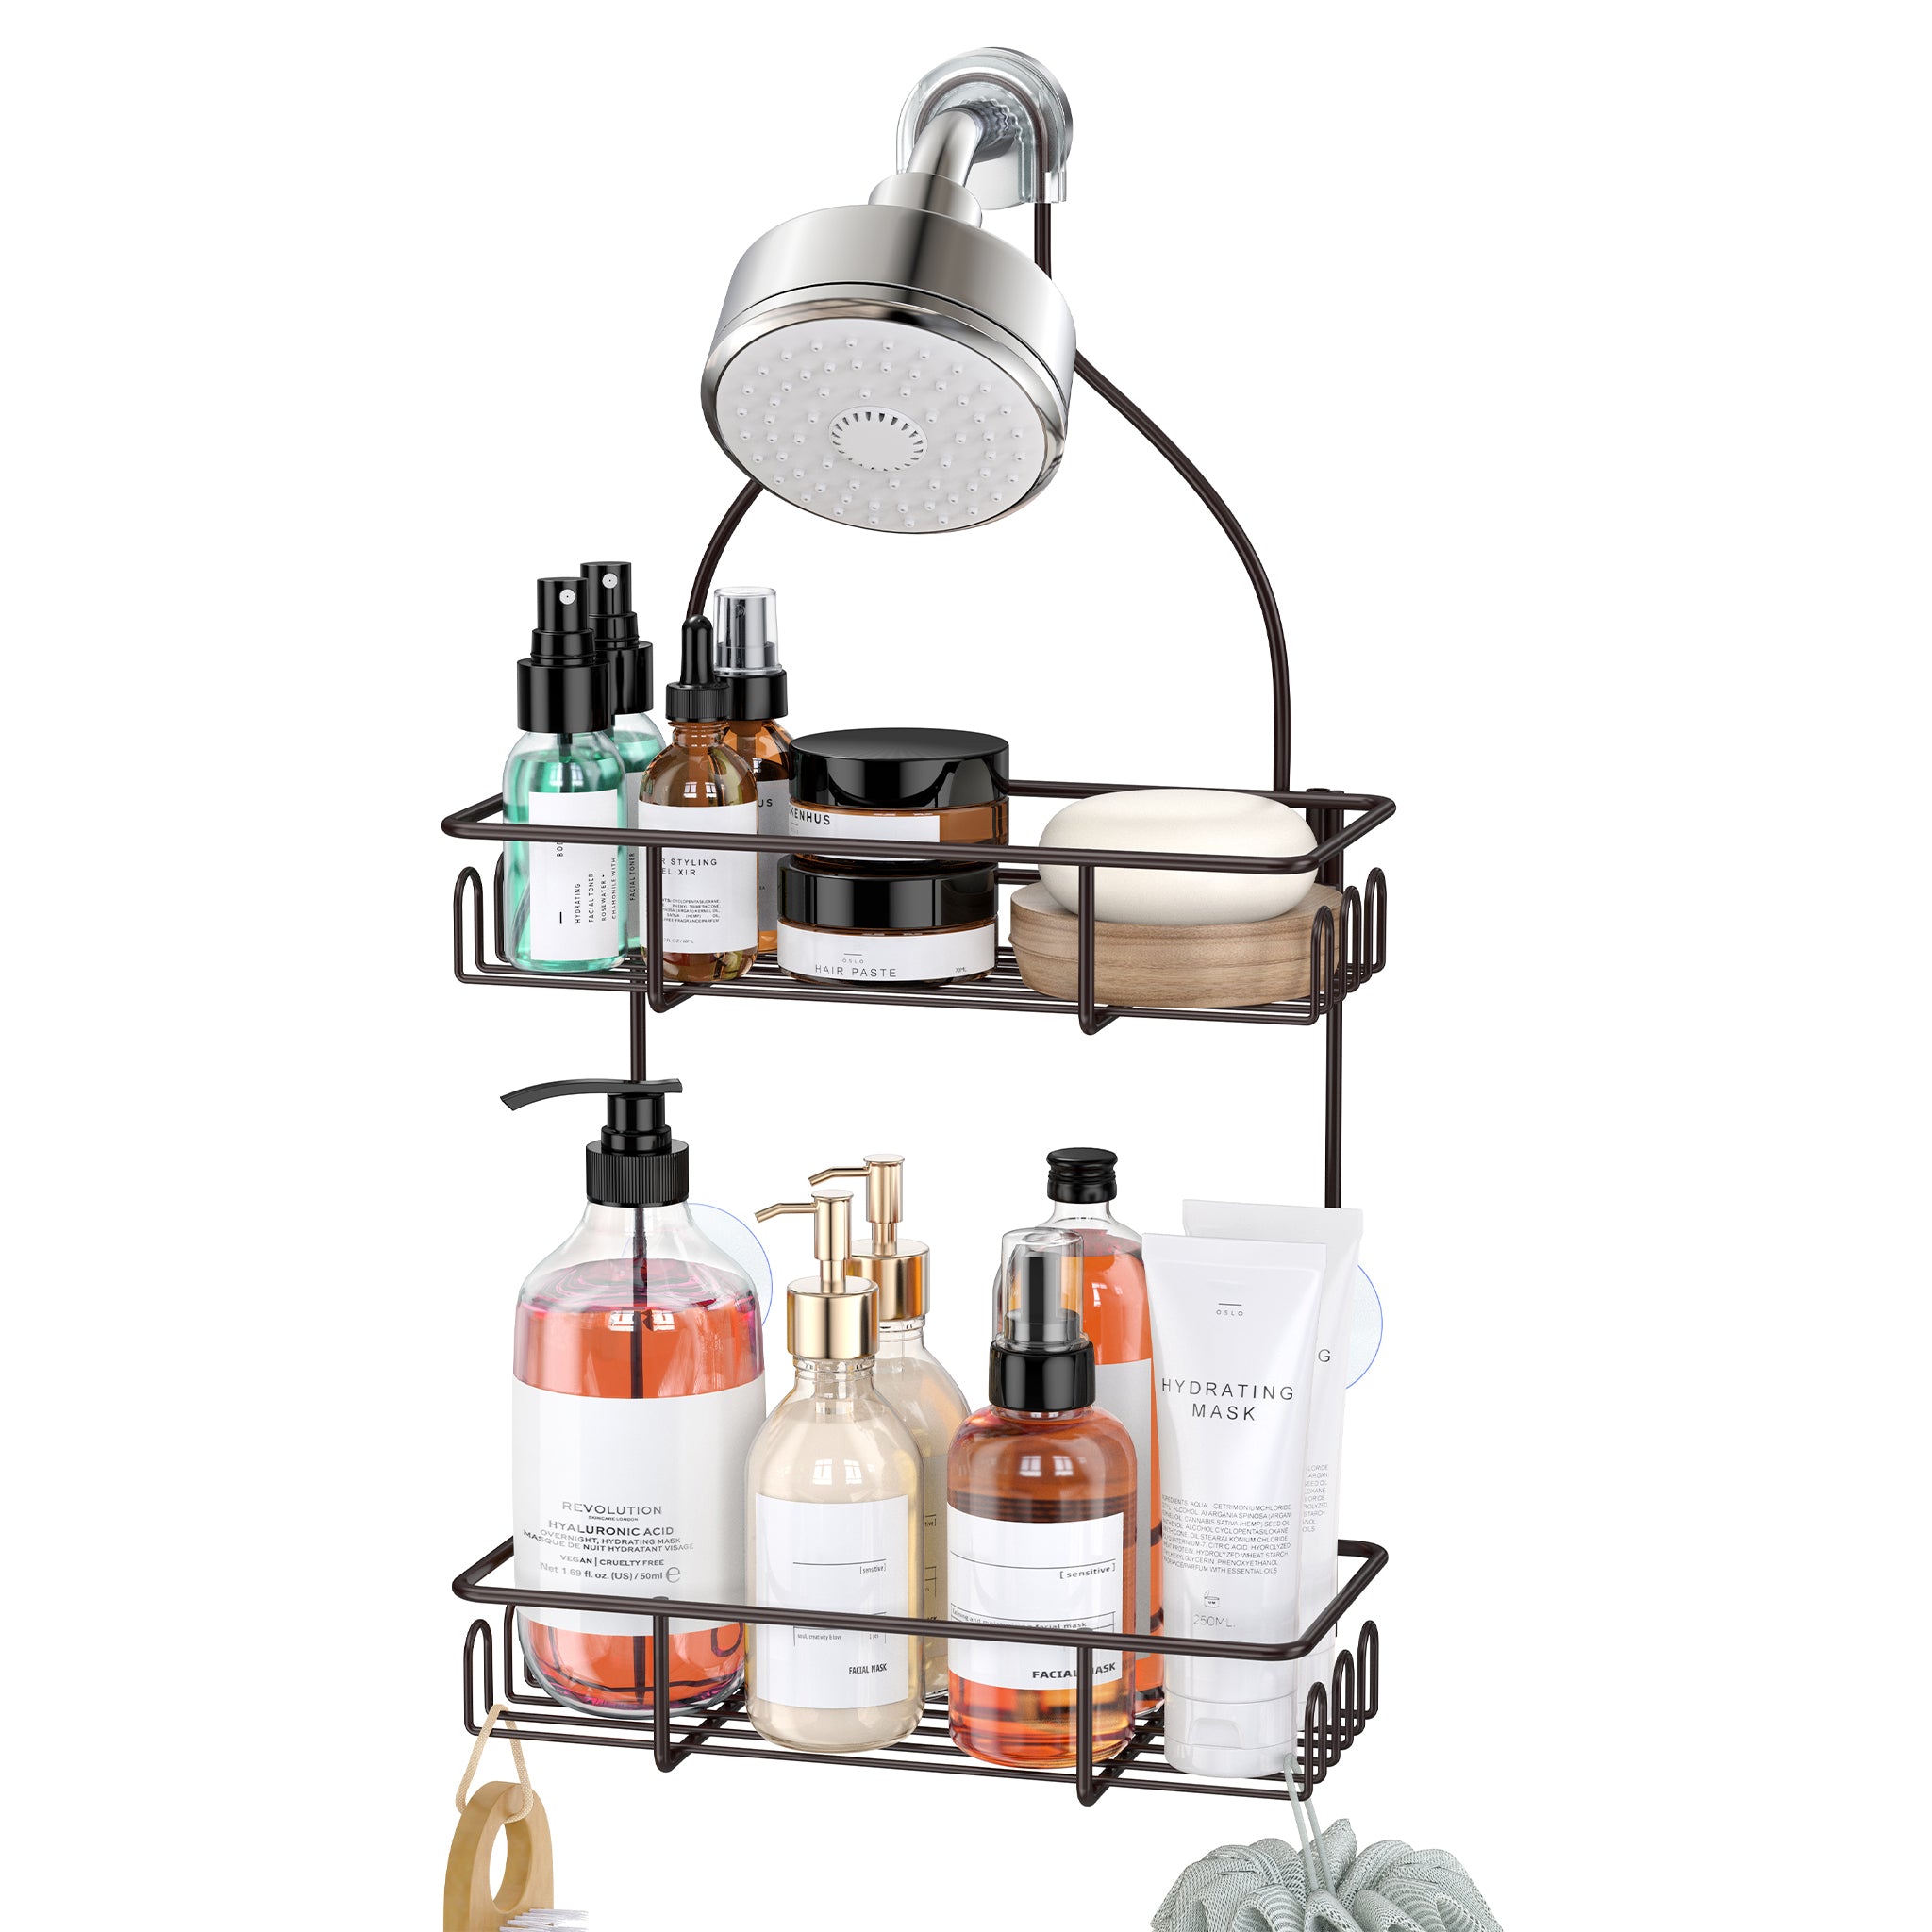 LUXEAR Adhesive Shower Caddy Review